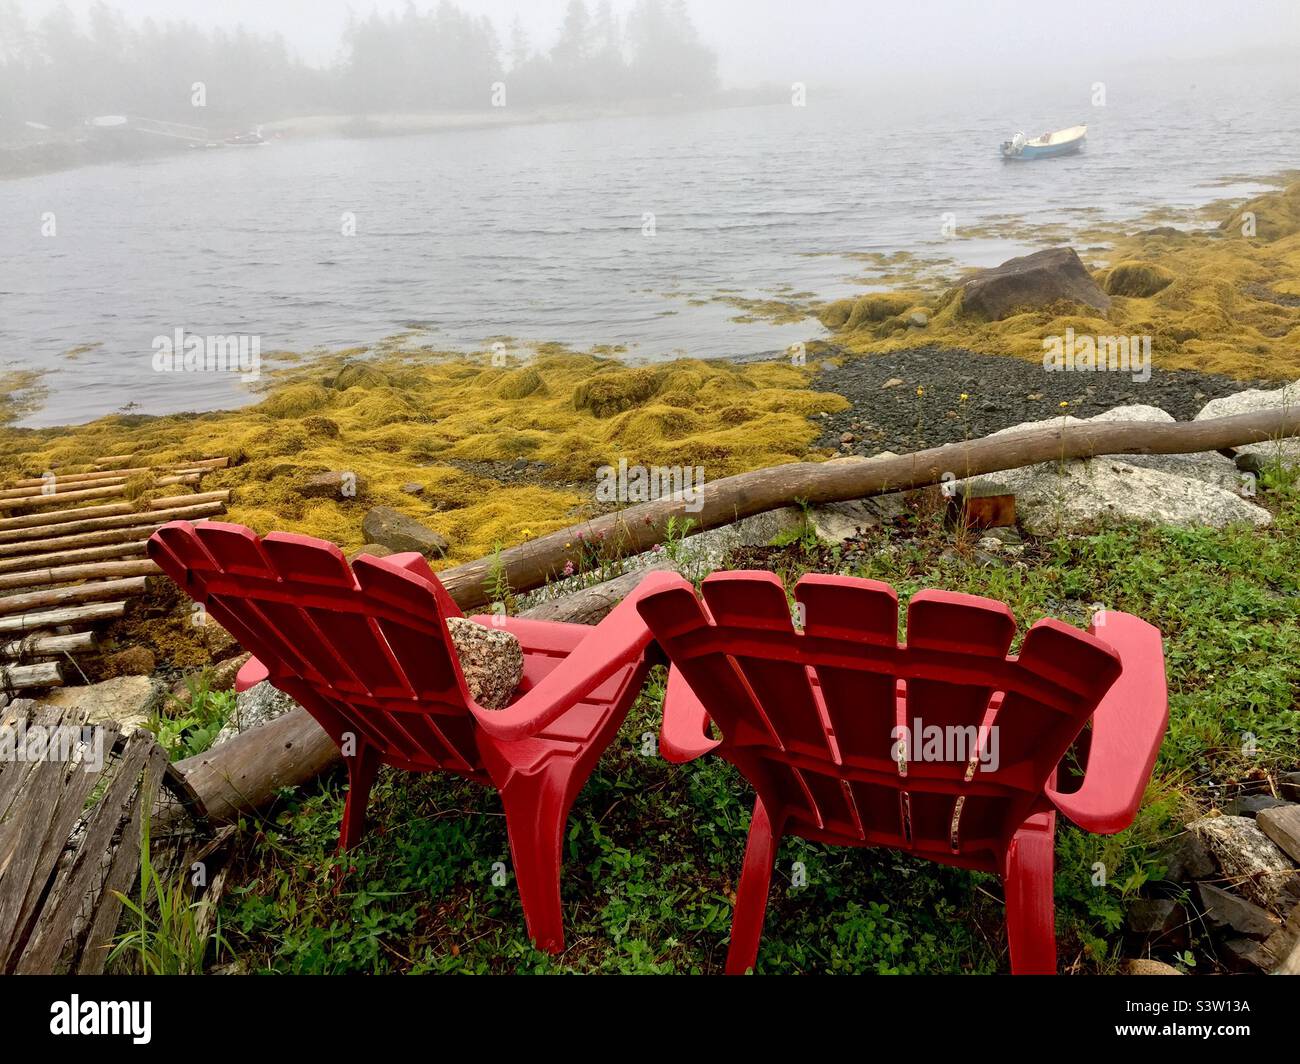 Waiting for fog to lift in a cove of the Atlantic Ocean, Halifax, Canada. Two unoccupied Adirondack chairs. Stock Photo